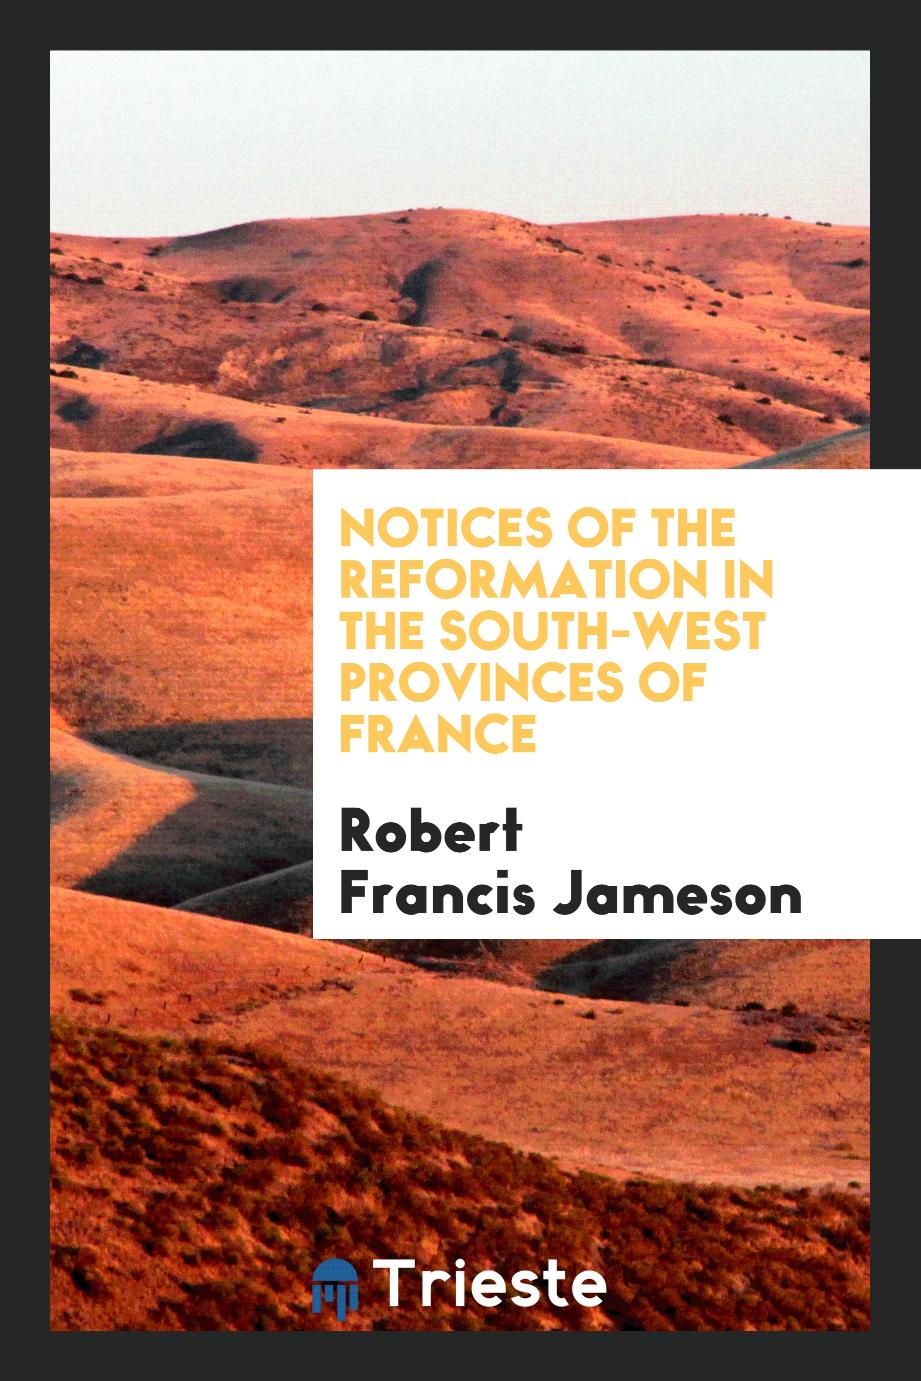 Notices of the Reformation in the South-West Provinces of France